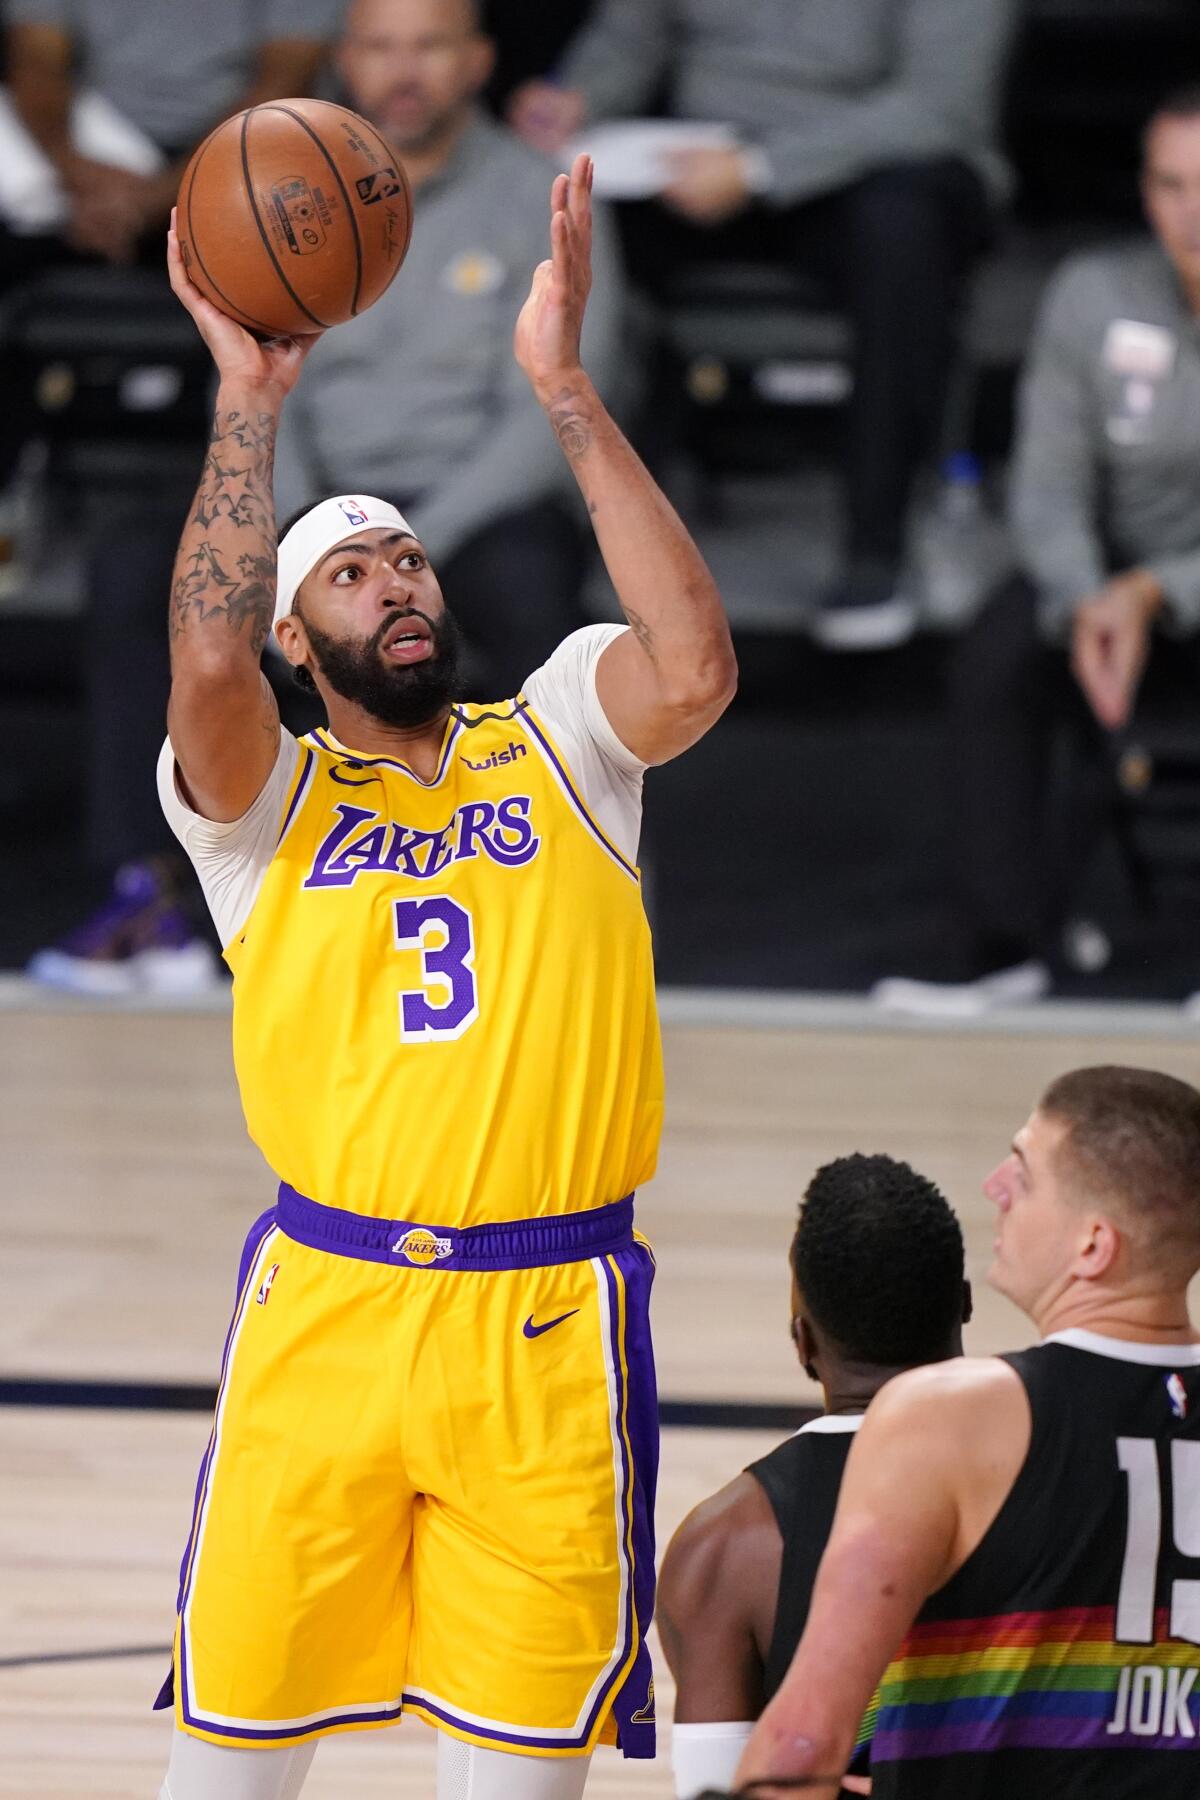 Anthony Davis has 14 of the Lakers' 29 points through the opening 9 minutes of Game 4.